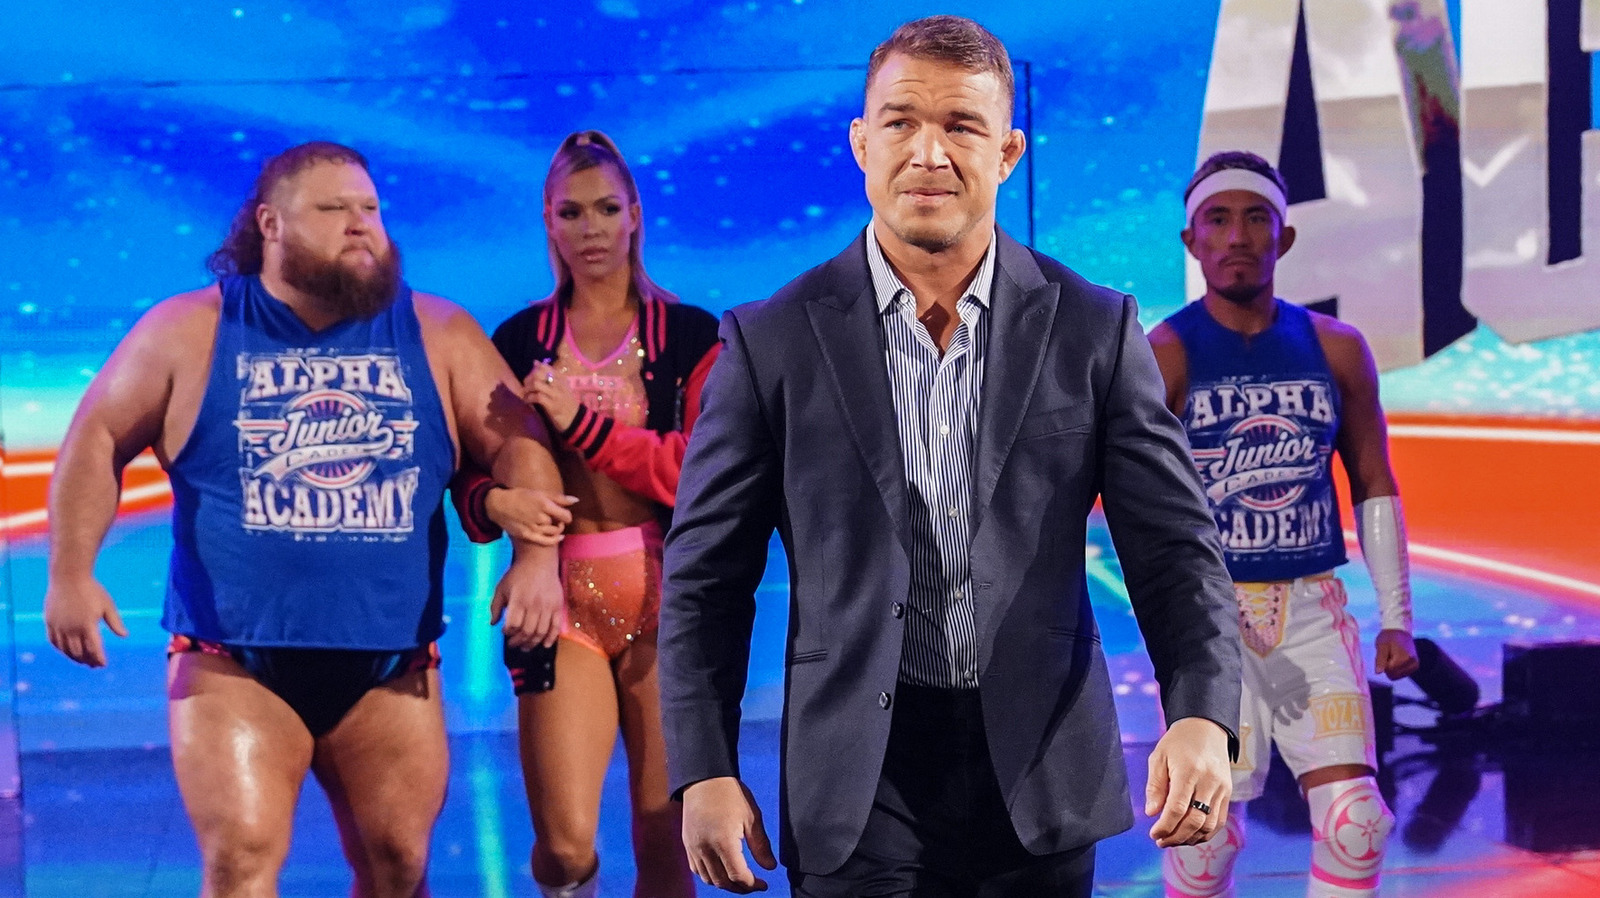 Kurt Angle Weighs In On WWE Star Chad Gable As The 'Rebirth' Of The 'Angle Formula'